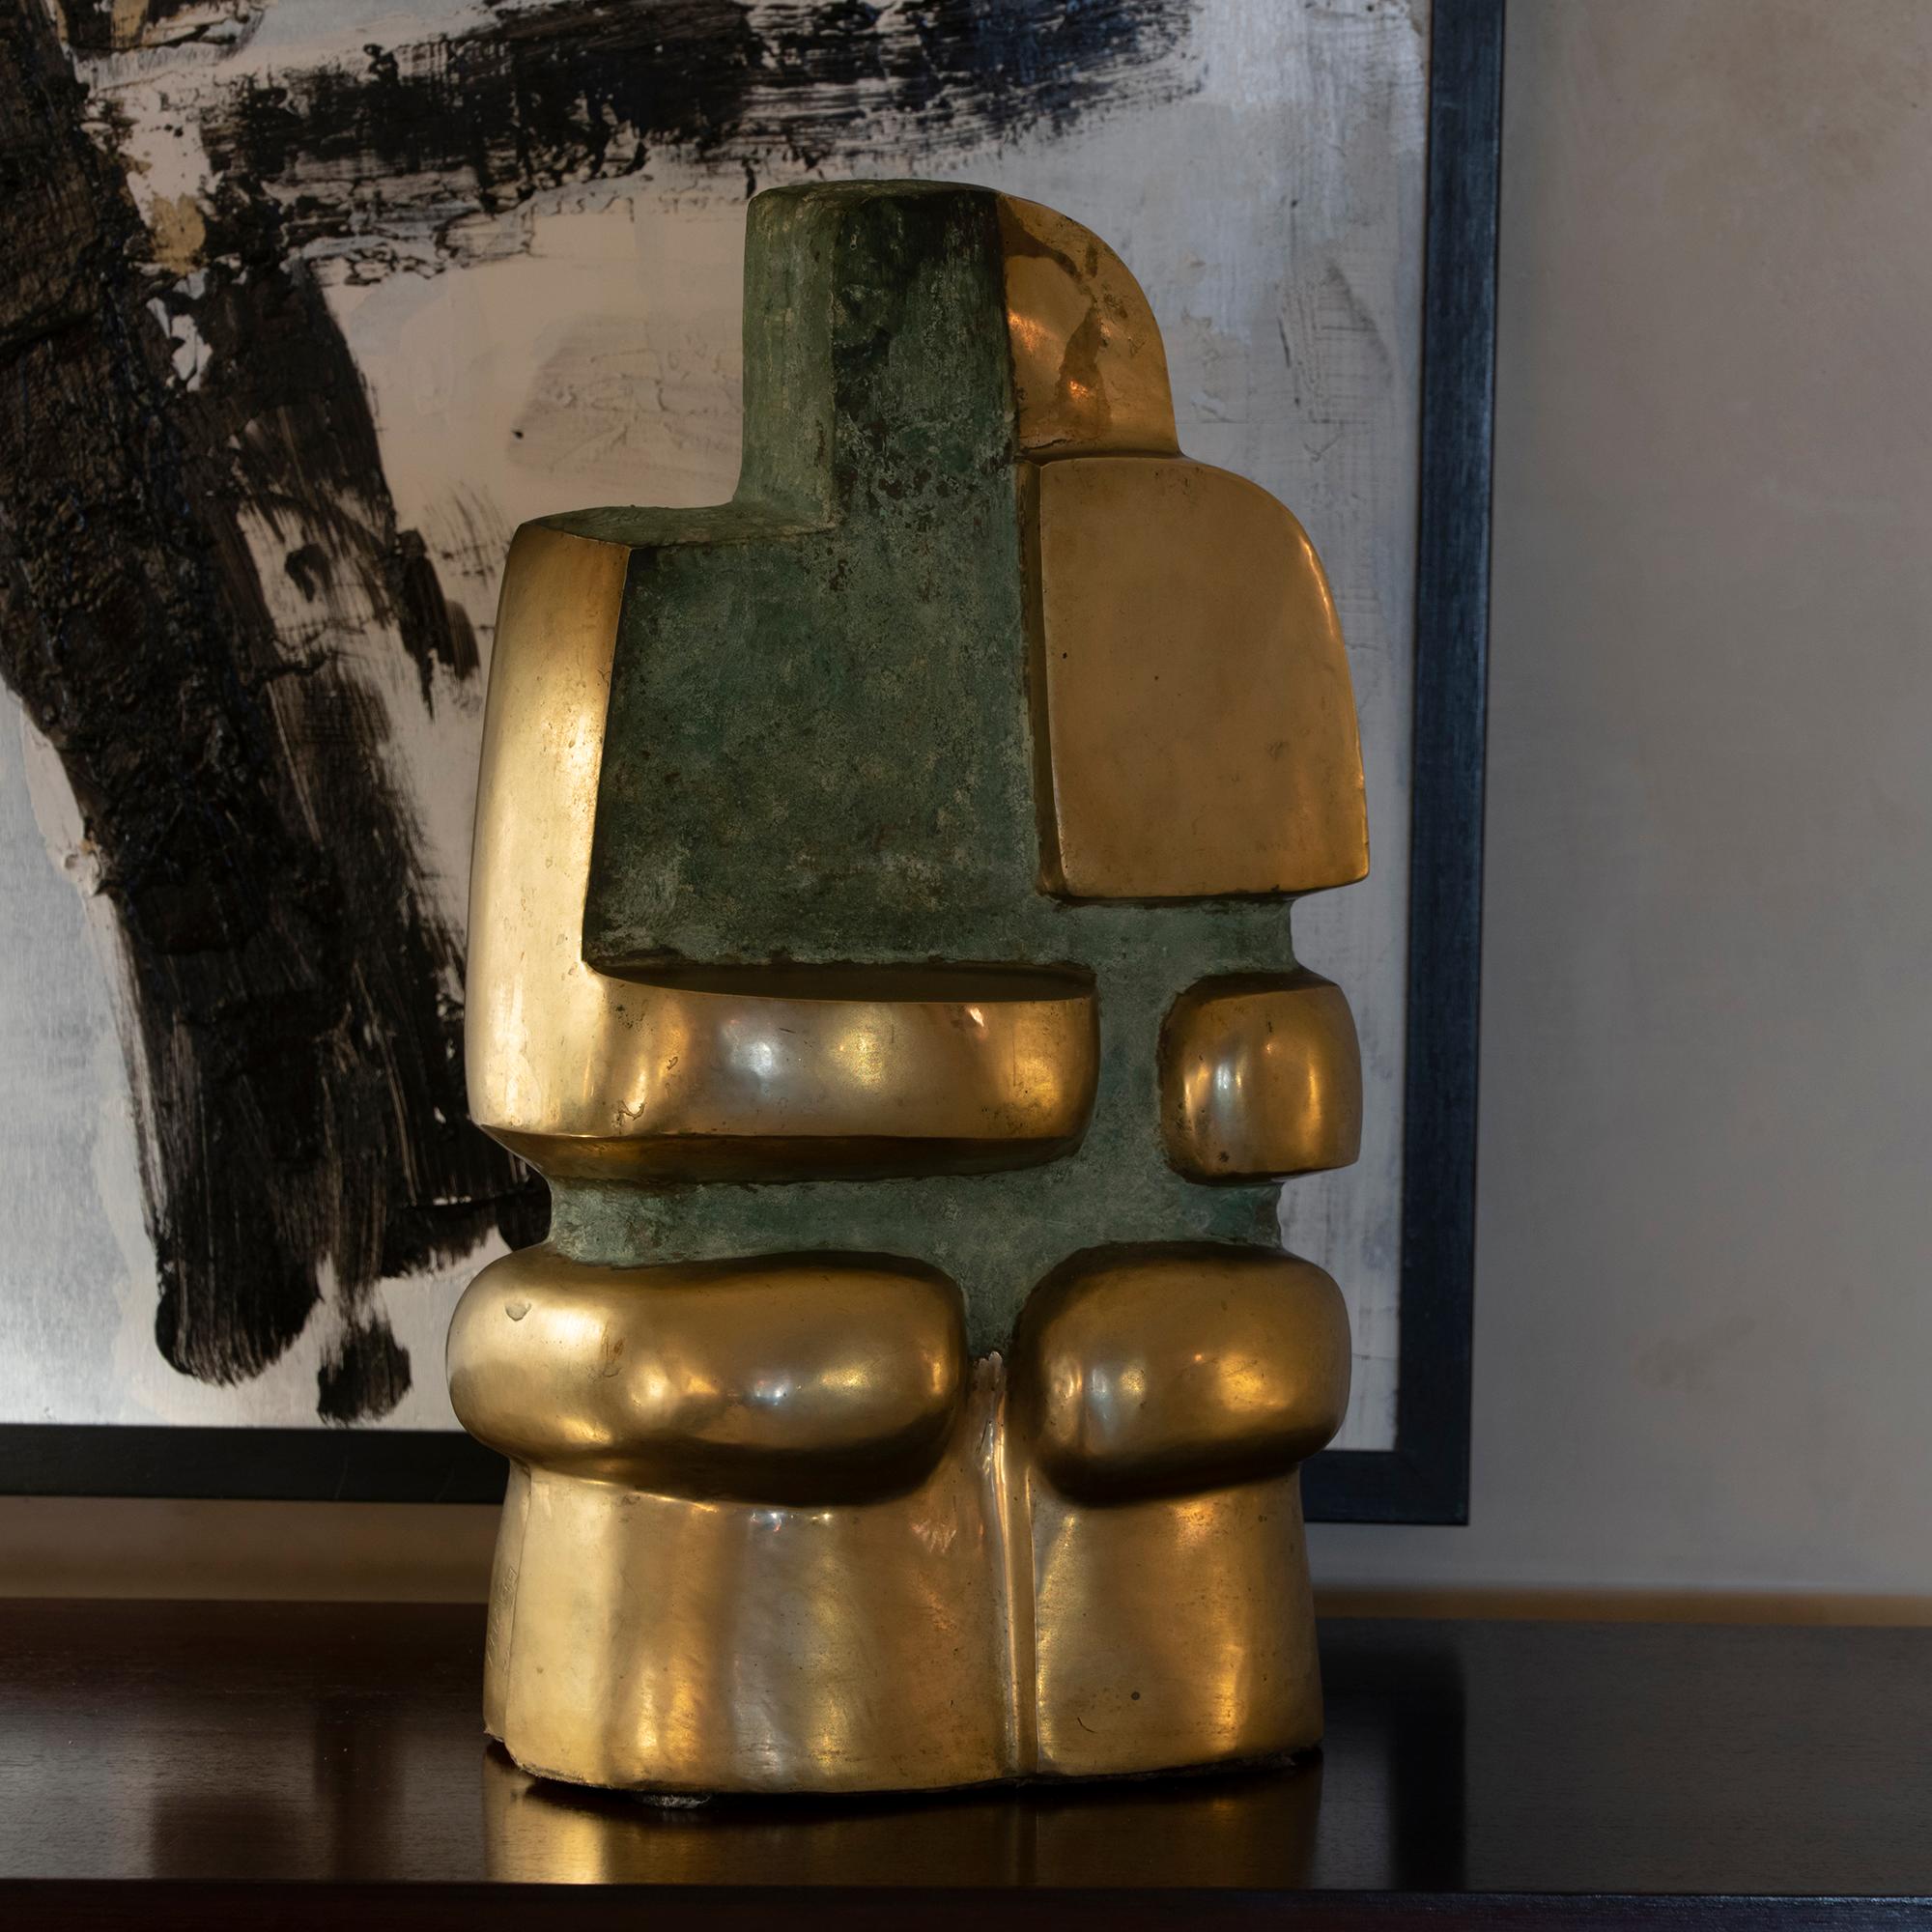 Belgian Polished Bronze Abstract Sculpture, Signed and Dated Pita Zaire 89